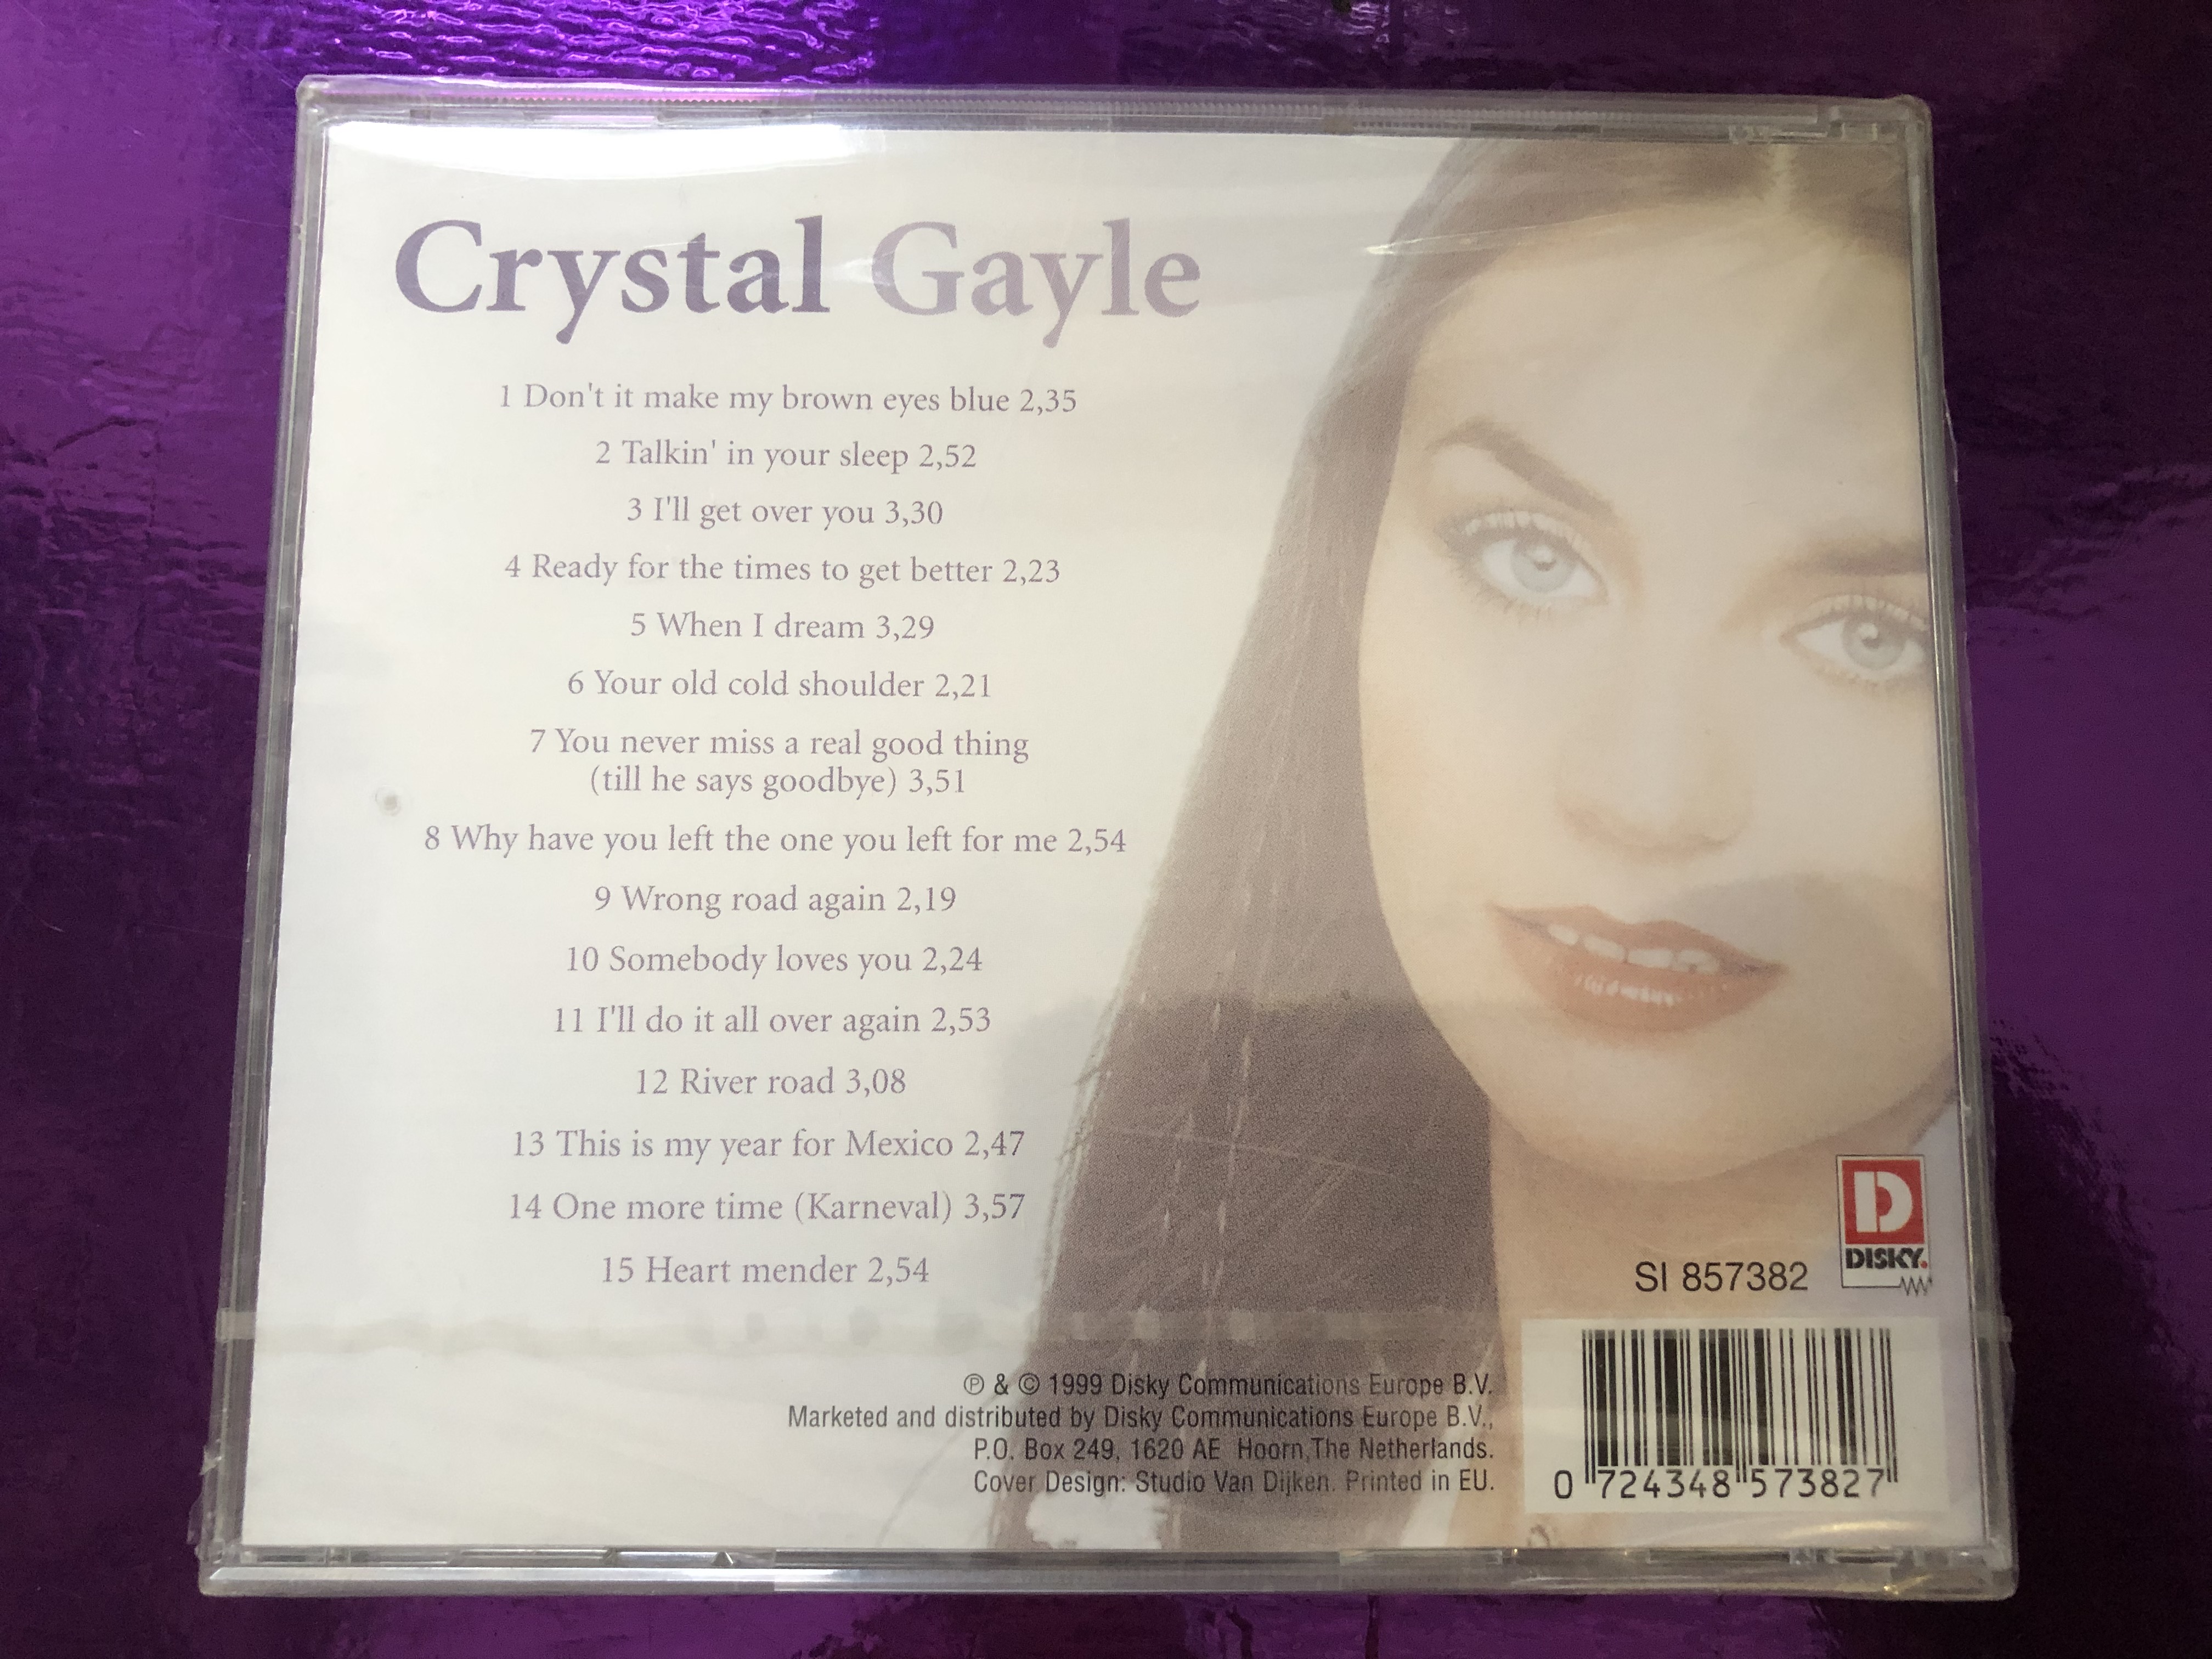 crystal-gayle-don-t-it-make-my-brown-eyes-blue-this-is-my-year-for-mexico-your-old-cold-shoulder-talkin-in-your-sleep-river-road-disky-audio-cd-1999-si-857382-2-.jpg